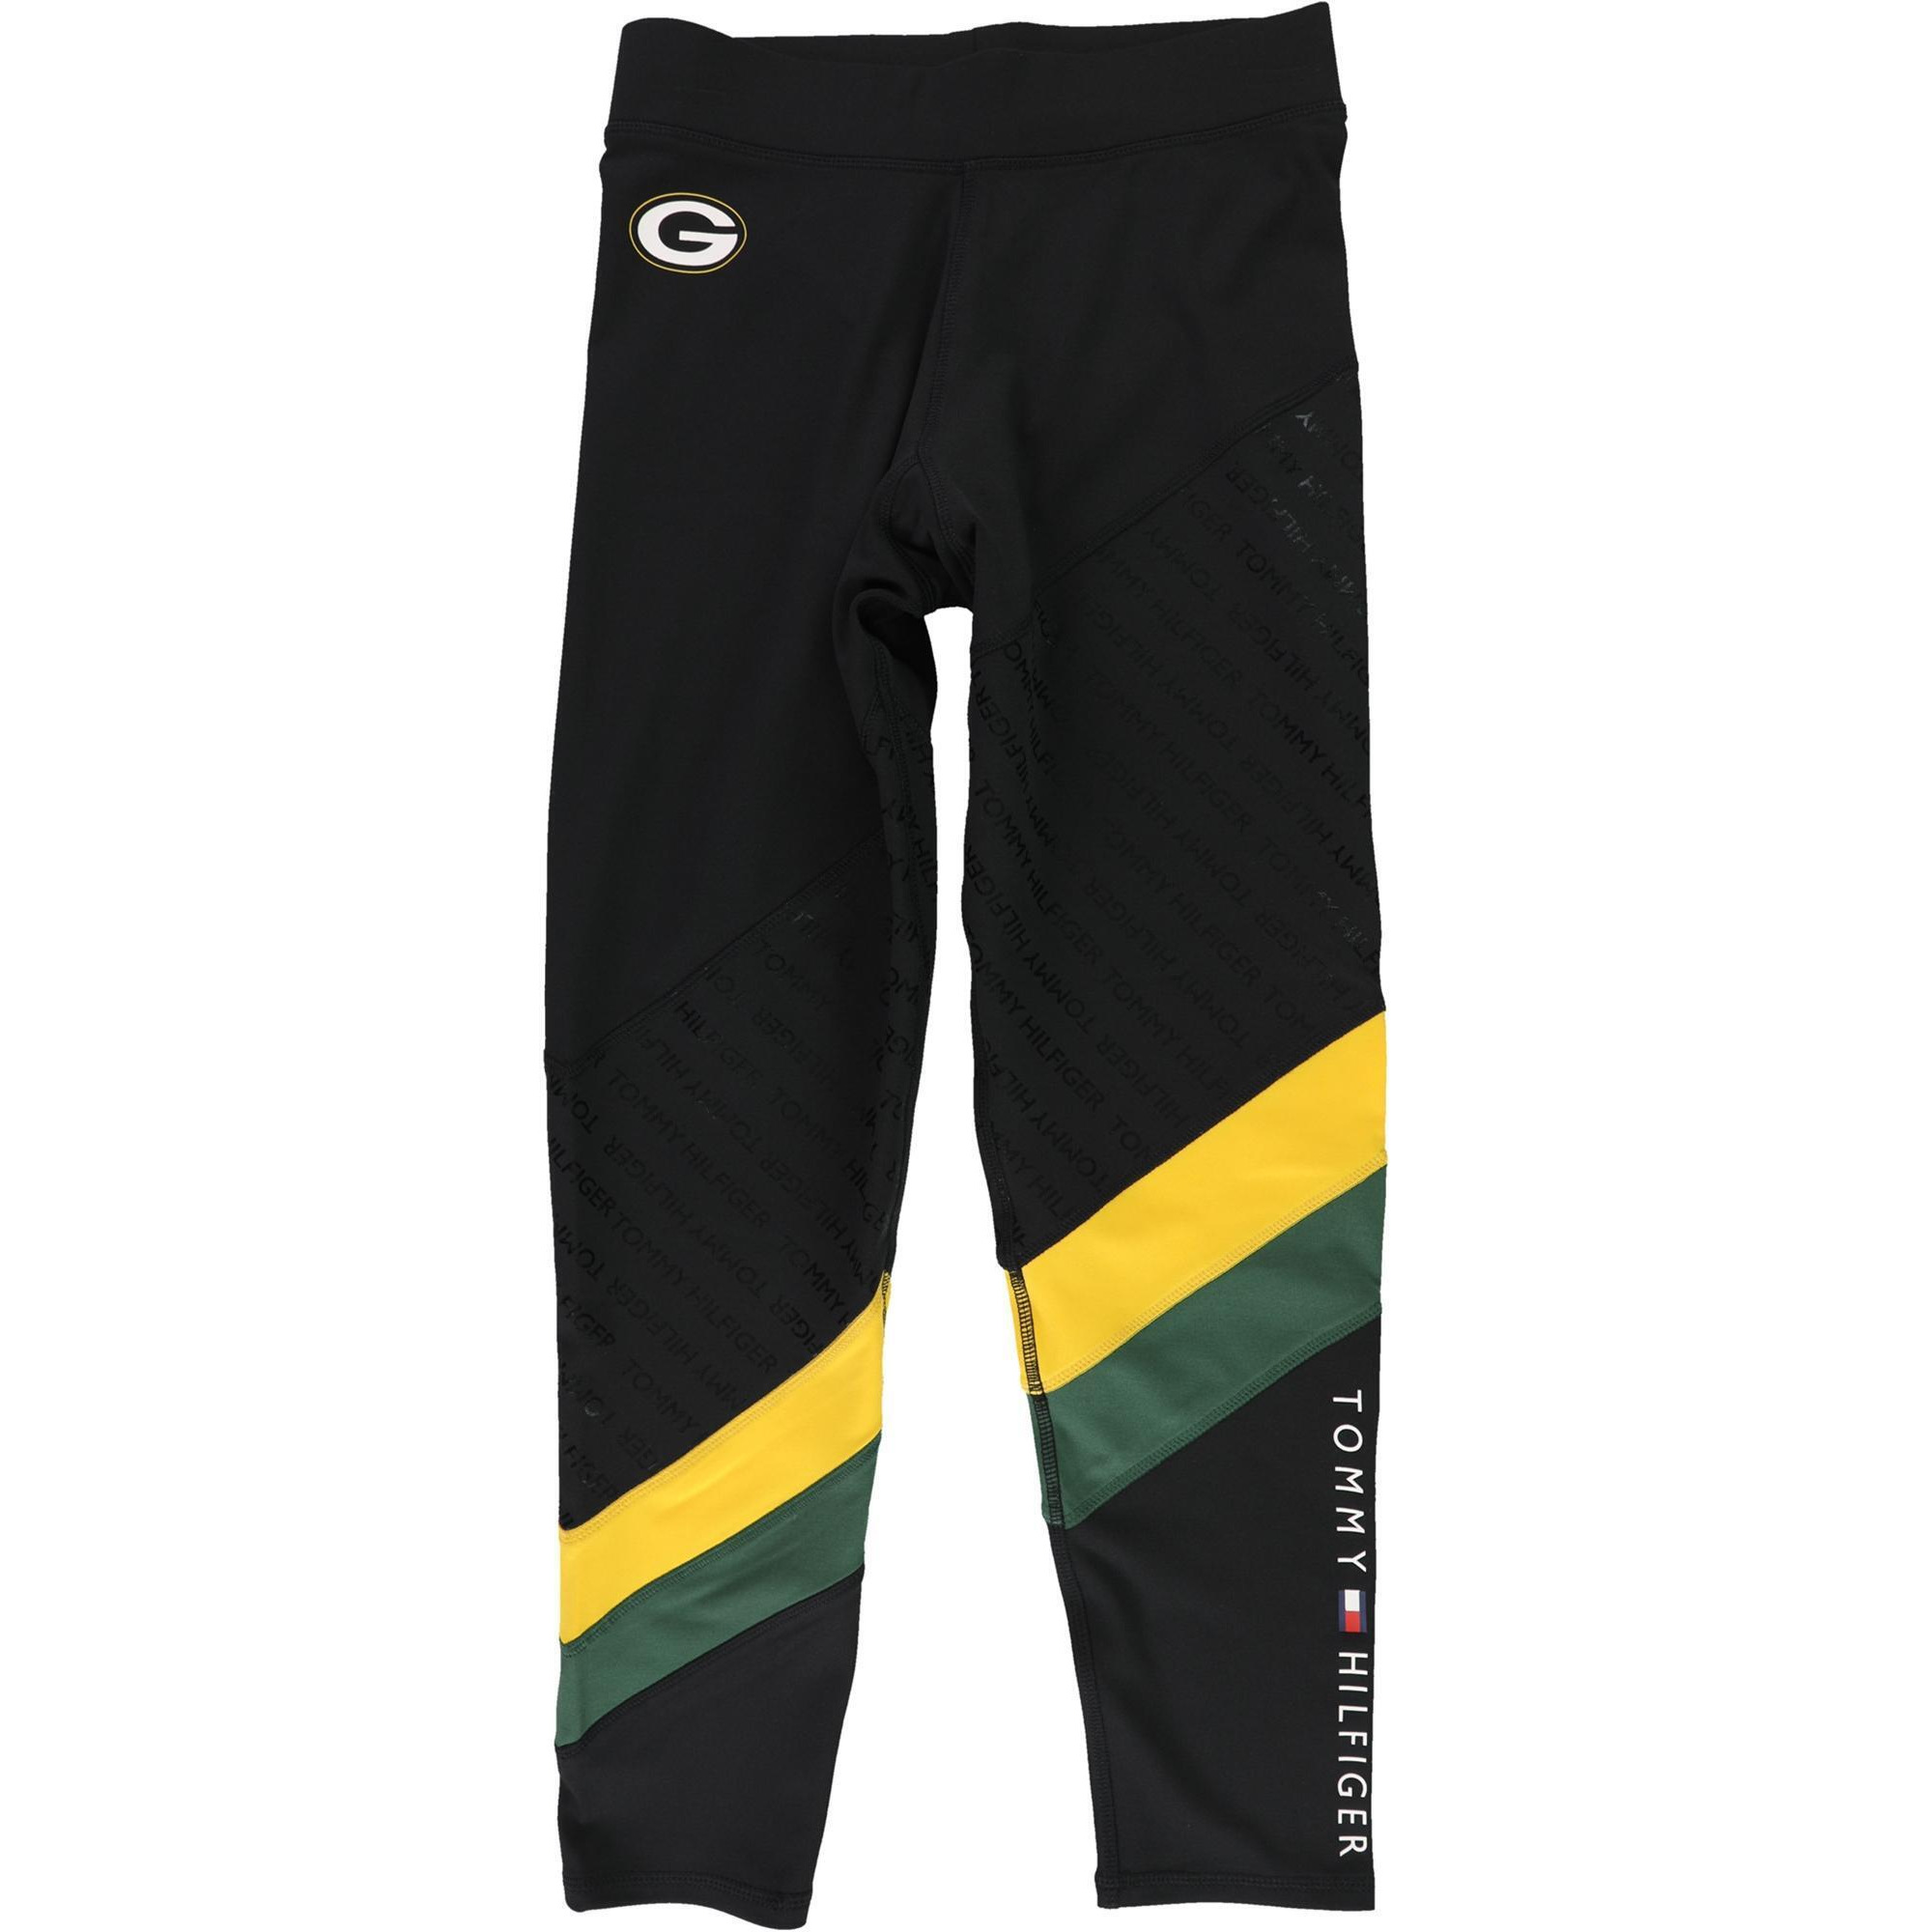 Tommy Hilfiger Womens Green Bay Packers Compression Athletic Pants, Style # 6U00Z056 alternate image